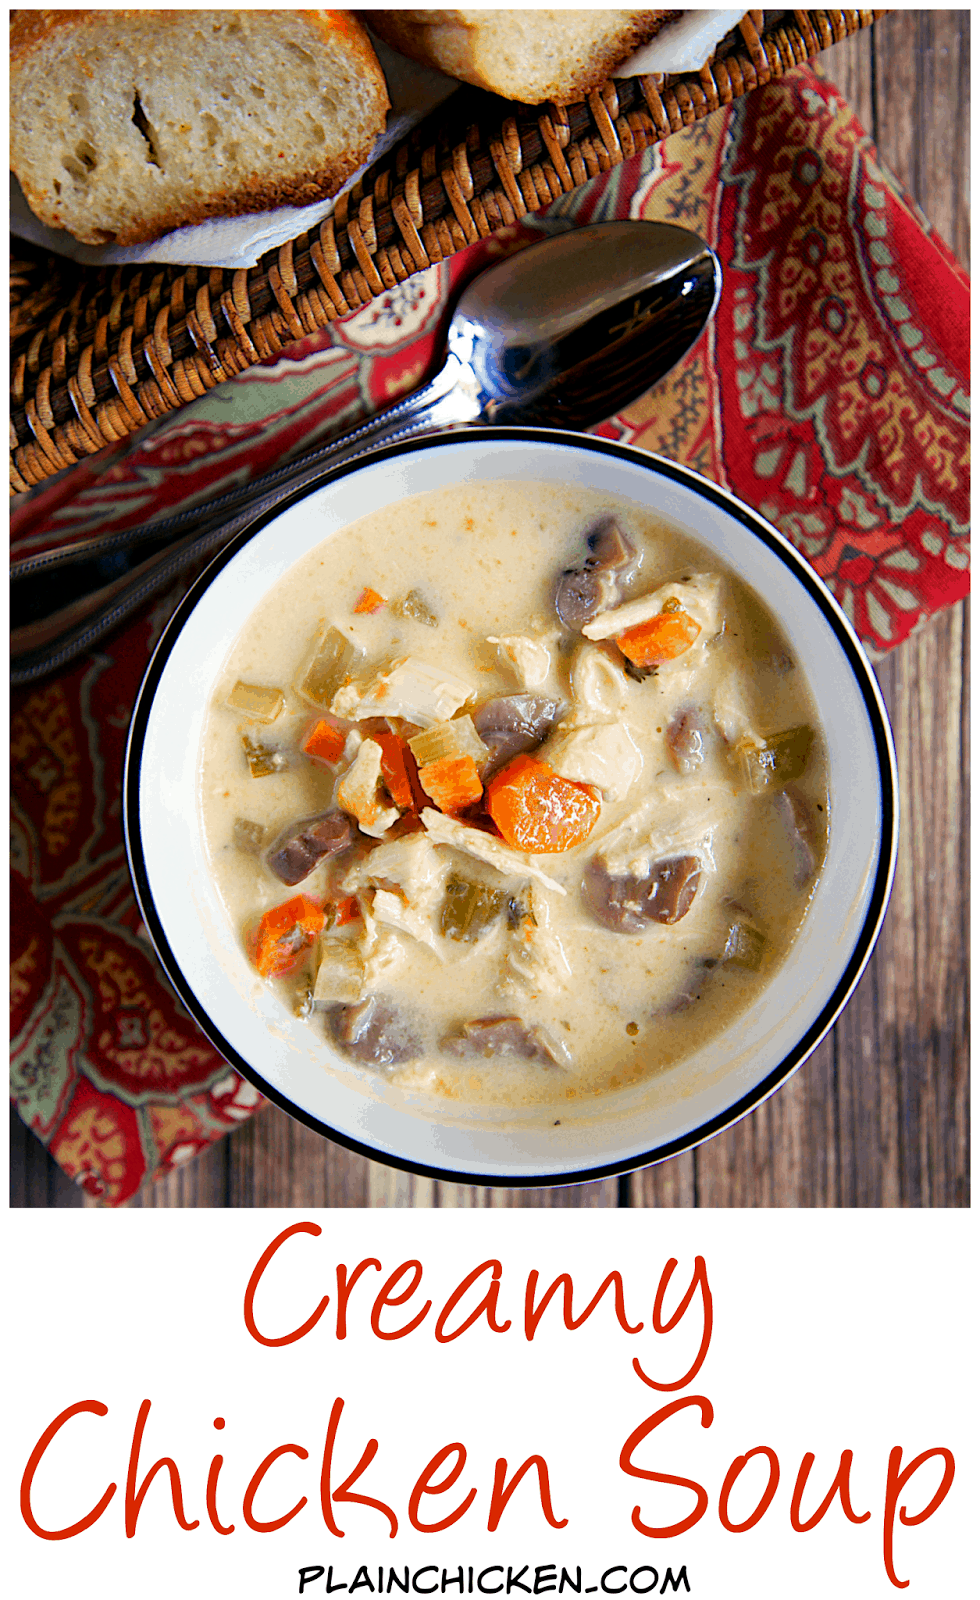 Creamy Chicken Soup Recipe - chicken, celery, carrots, mushrooms, chicken broth, cream of chicken soup, half-and-half and cheese! Can use rotisserie chicken for a super quick meal or boneless chicken breasts for an easy slow cooker meal. Freeze leftovers for a quick meal later!